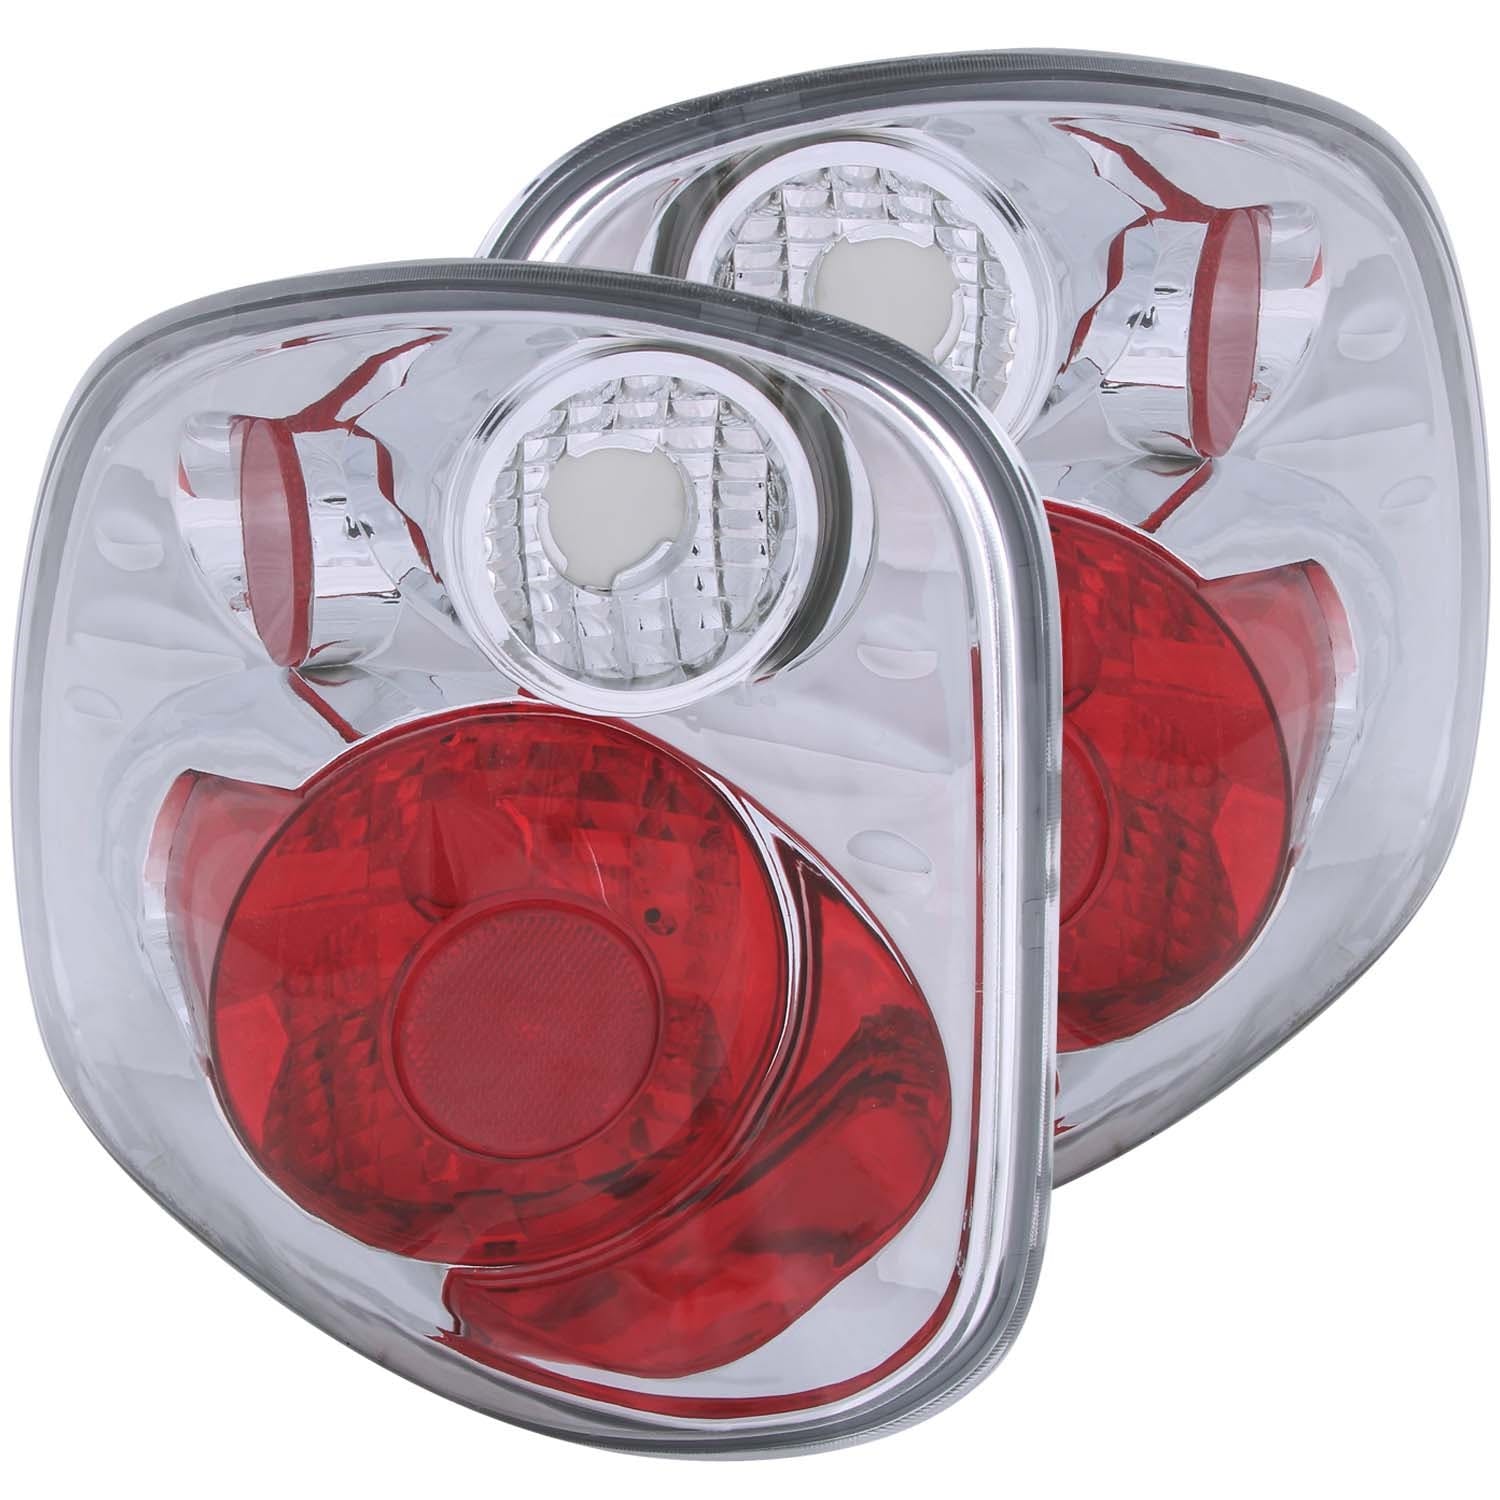 AnzoUSA 211068 Taillights Chrome